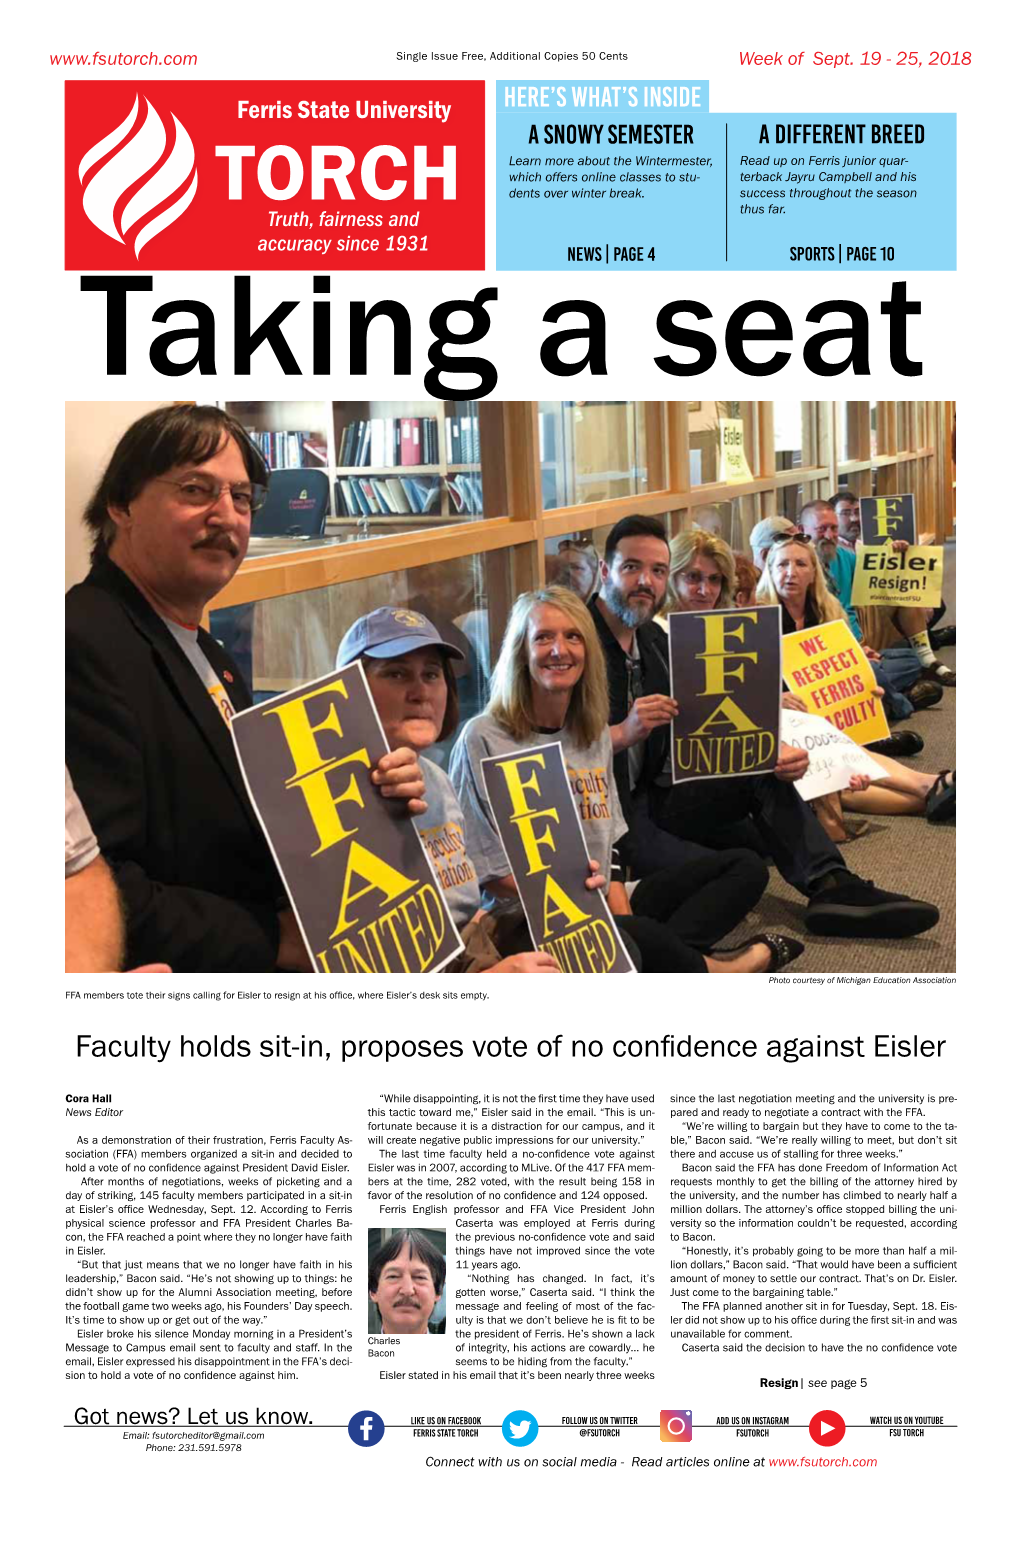 Faculty Holds Sit-In, Proposes Vote of No Confidence Against Eisler